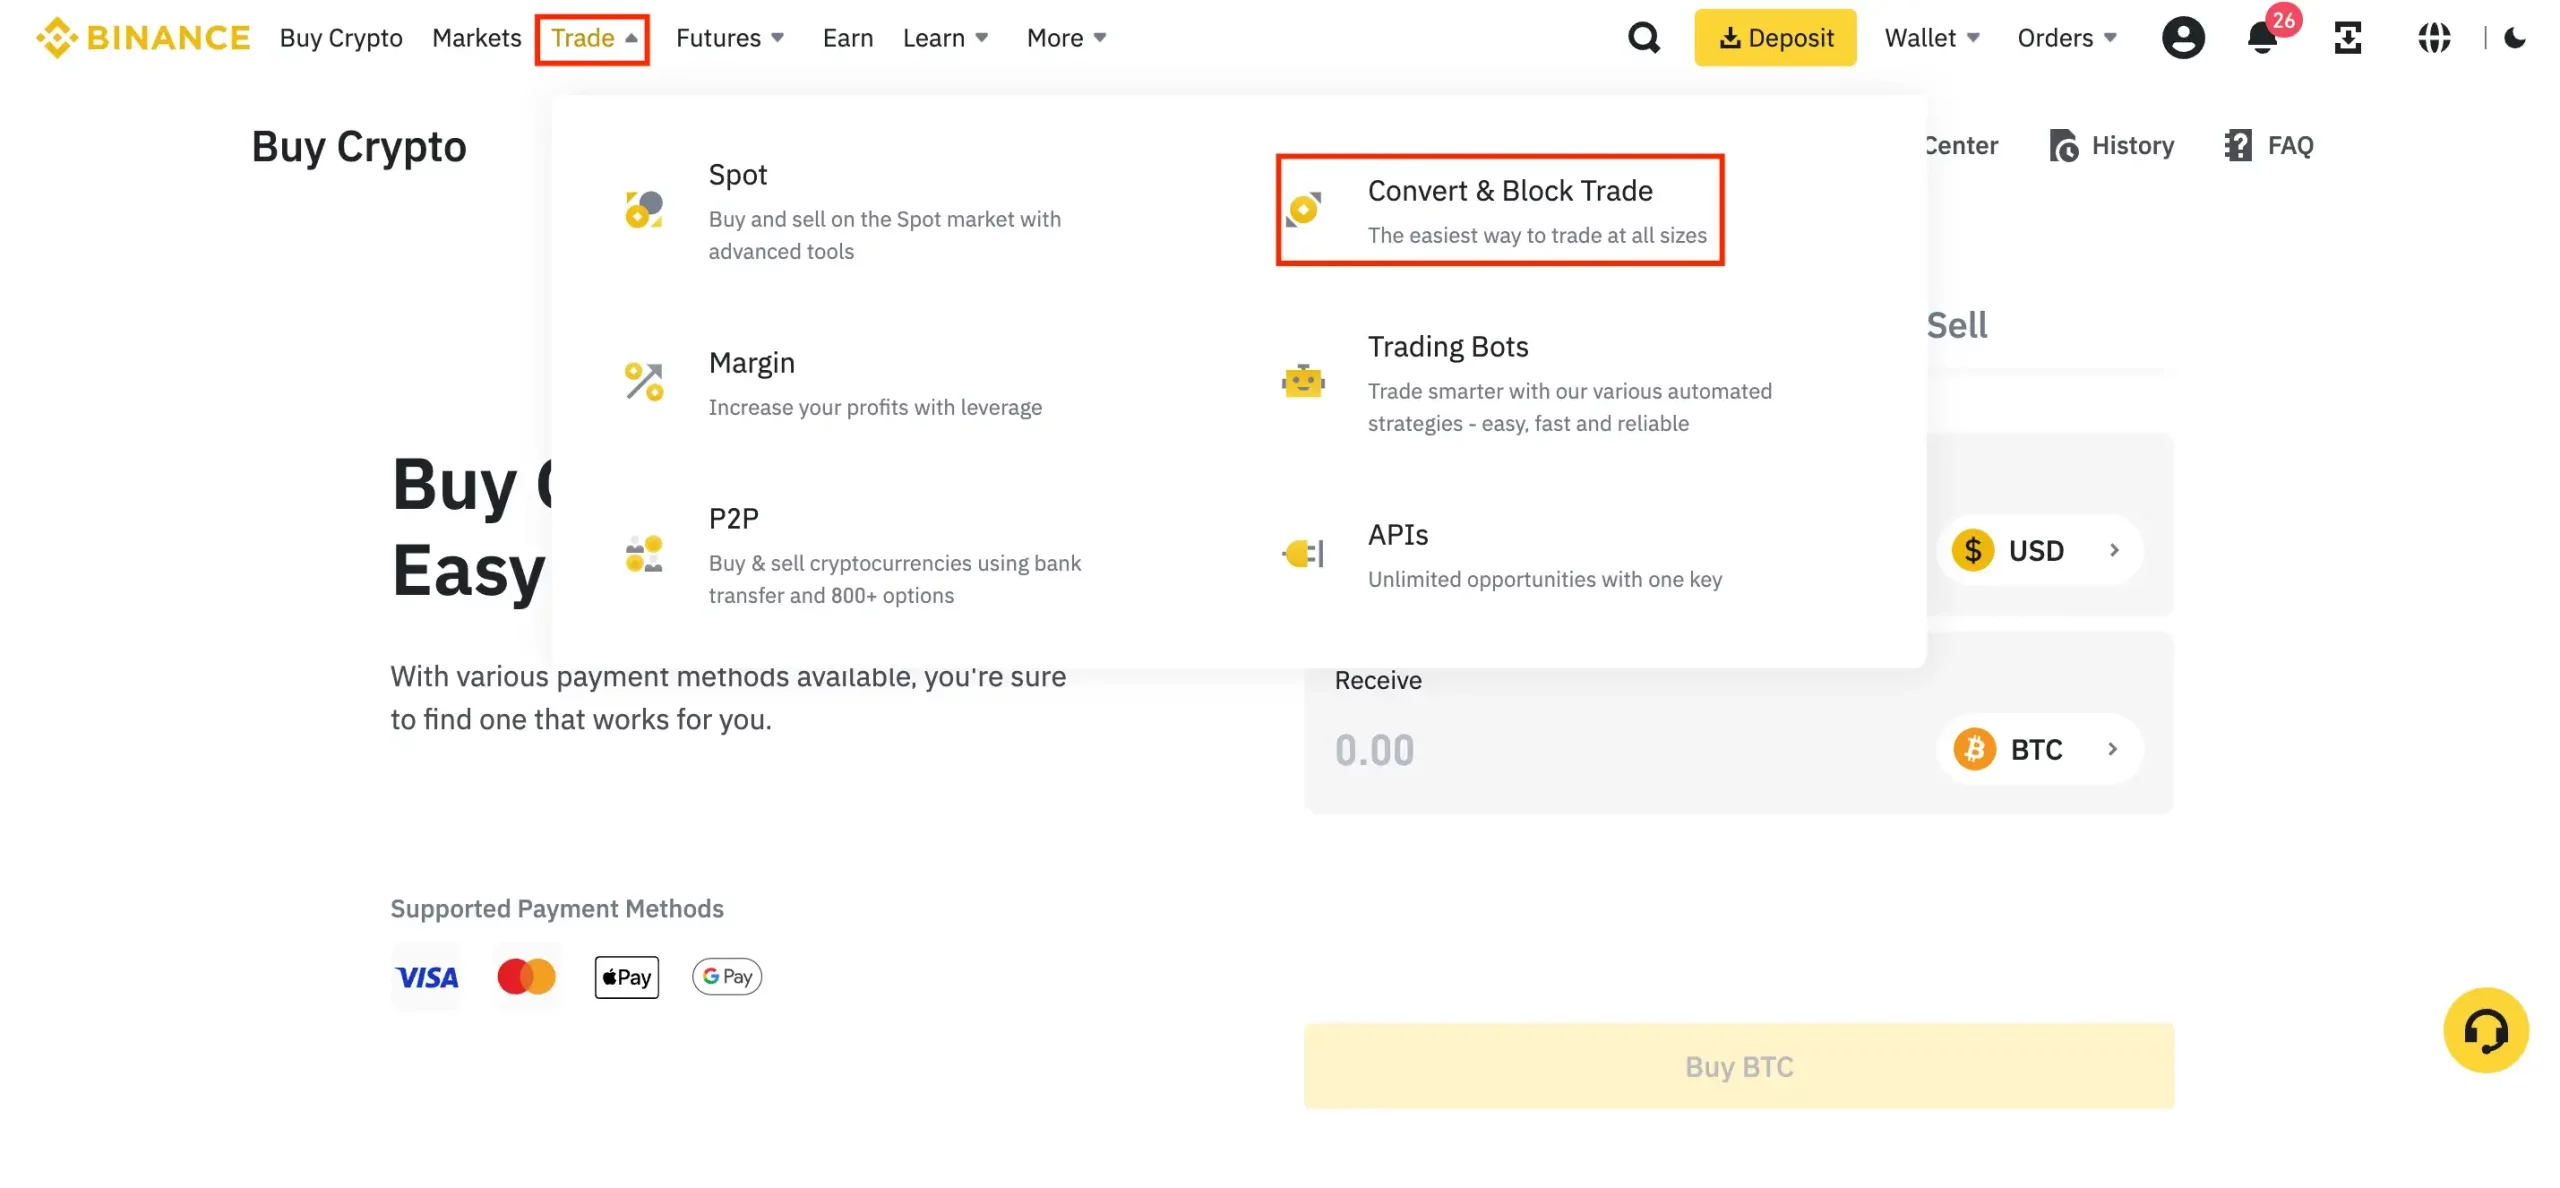 Select Trade and Convert & Block Trade from Binance